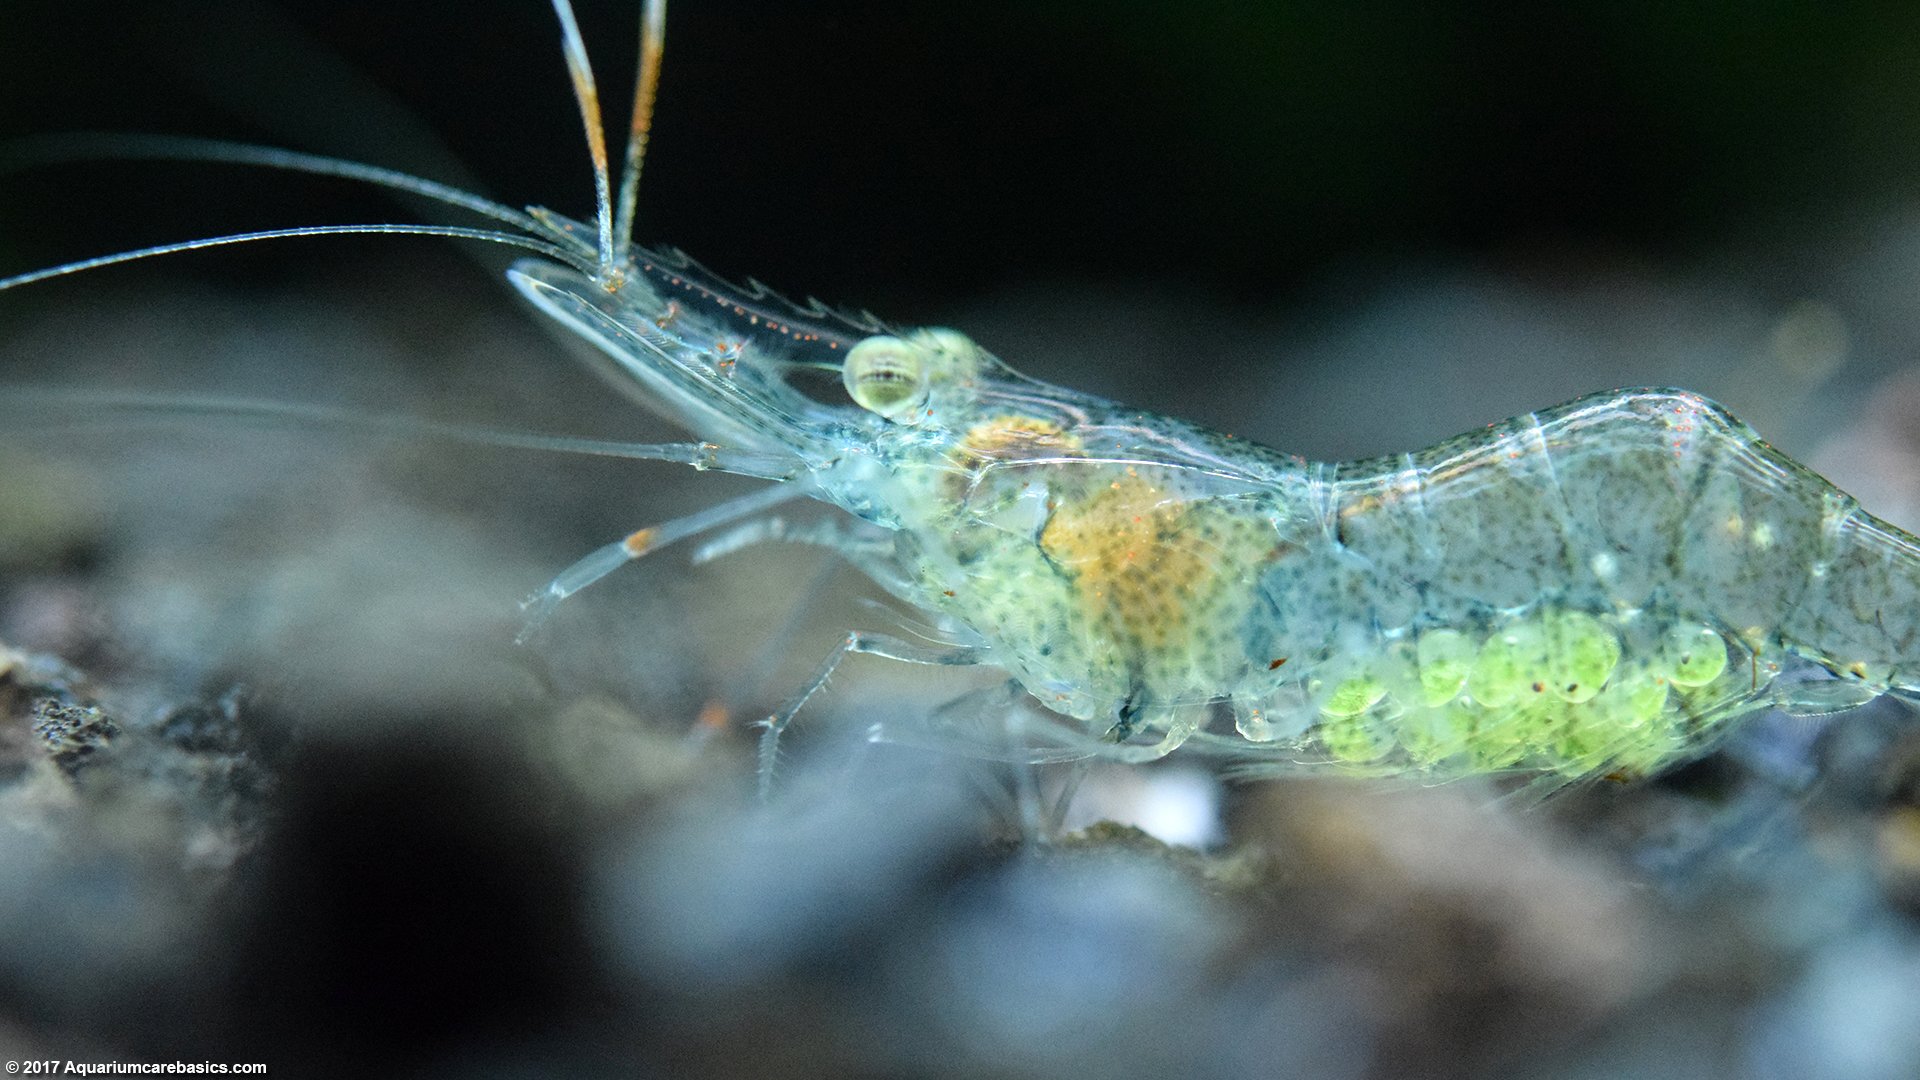 are ghost shrimp easy to care for